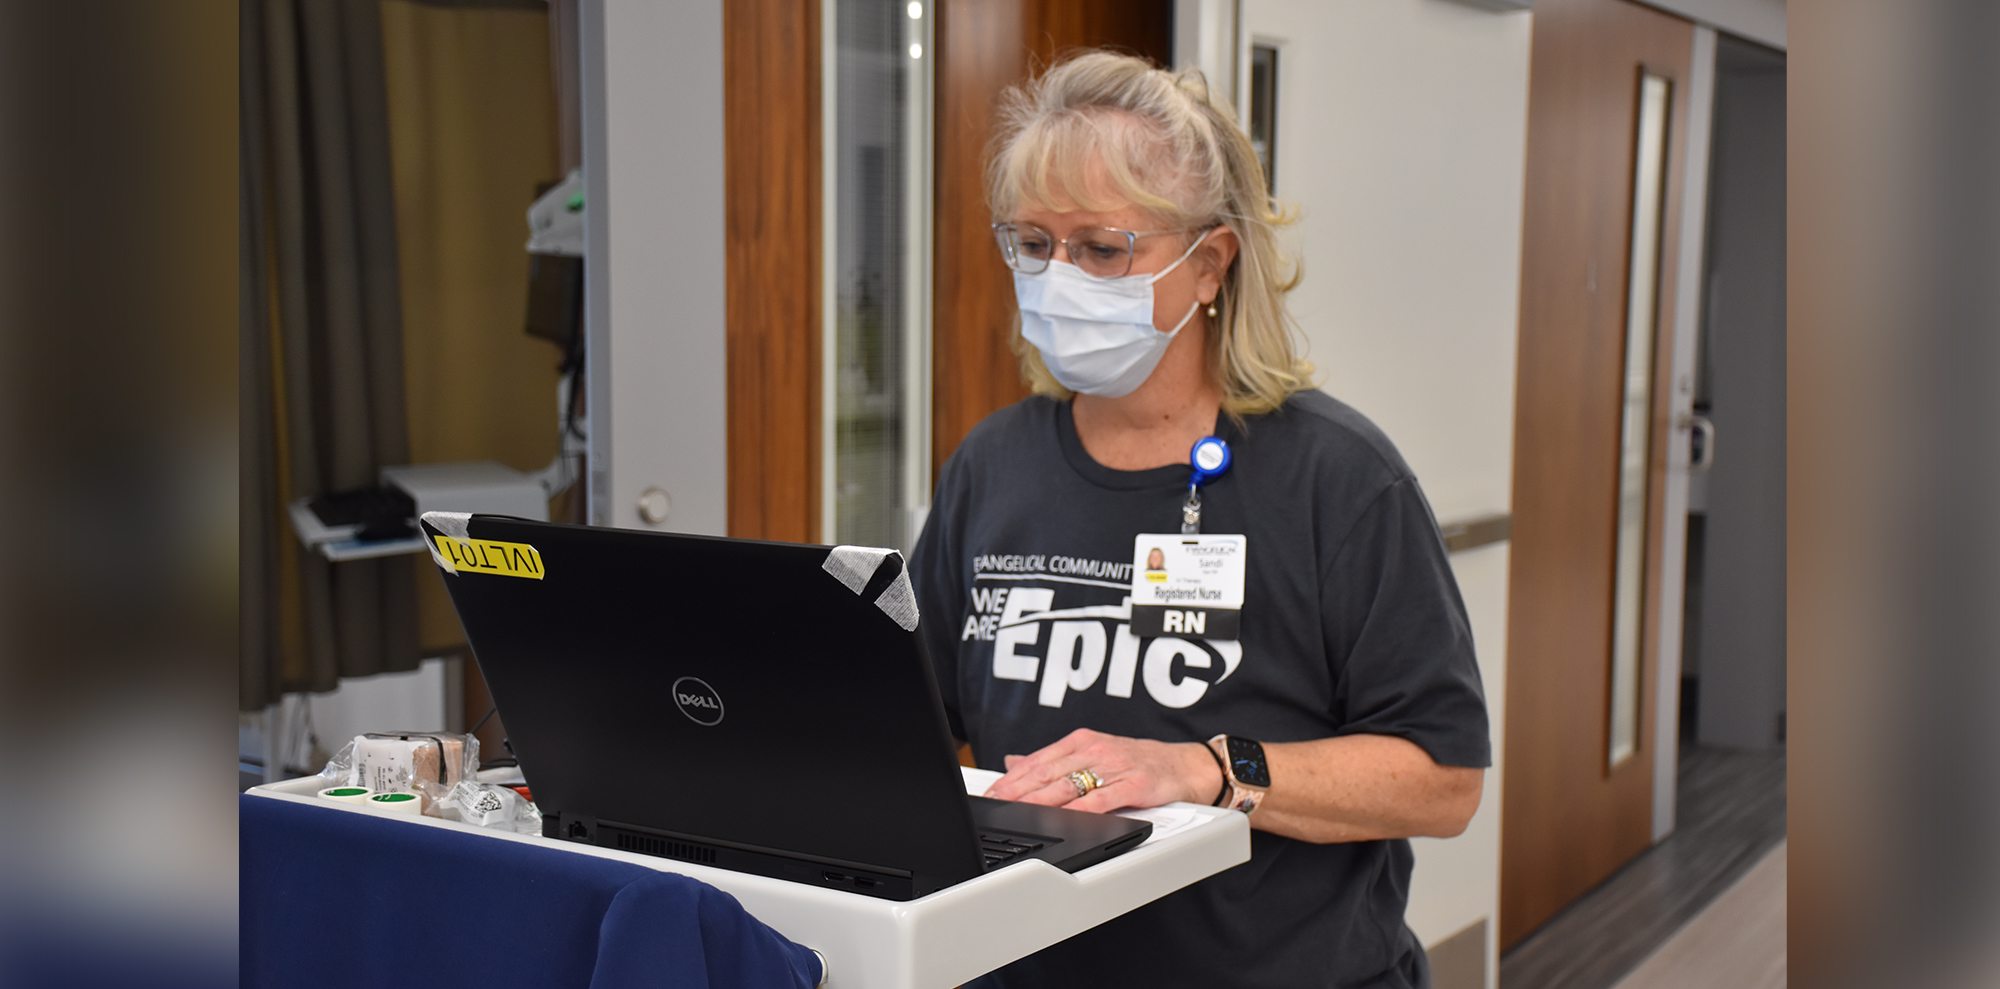 Evangelical Community Hospital Successfully Moved to New Electronic Health Record 